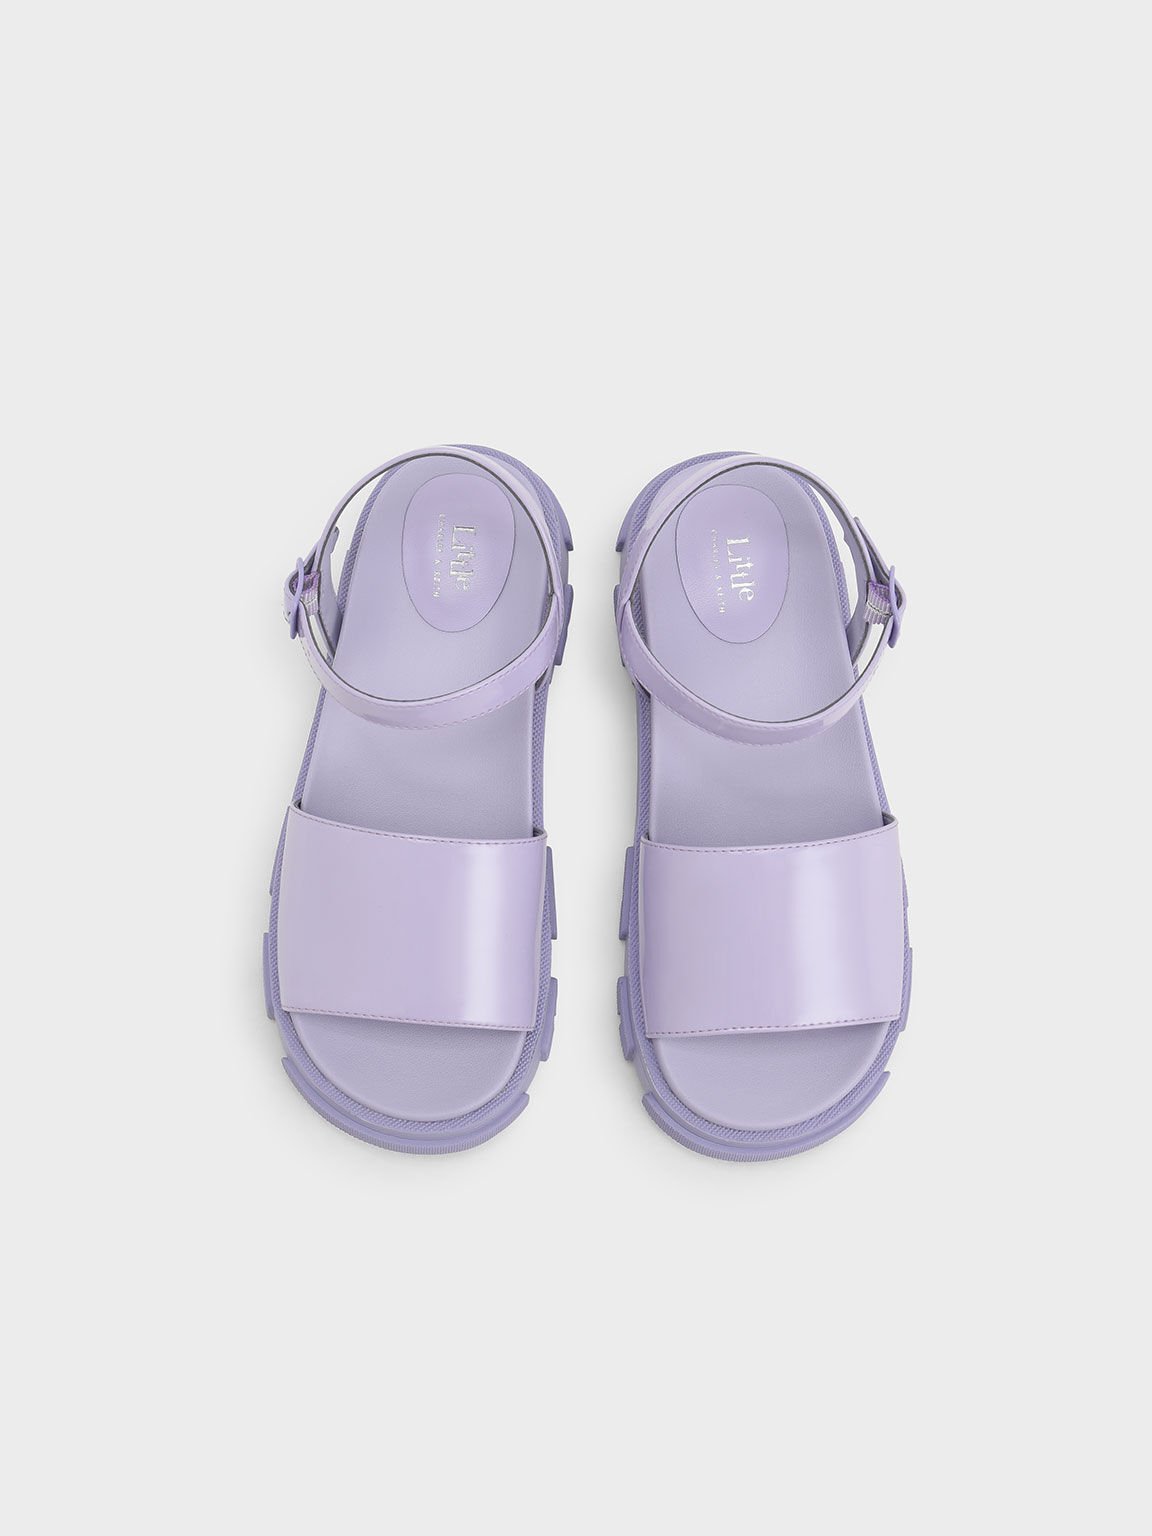 Girls' Patent Ankle-Strap Sandals, Lilac, hi-res